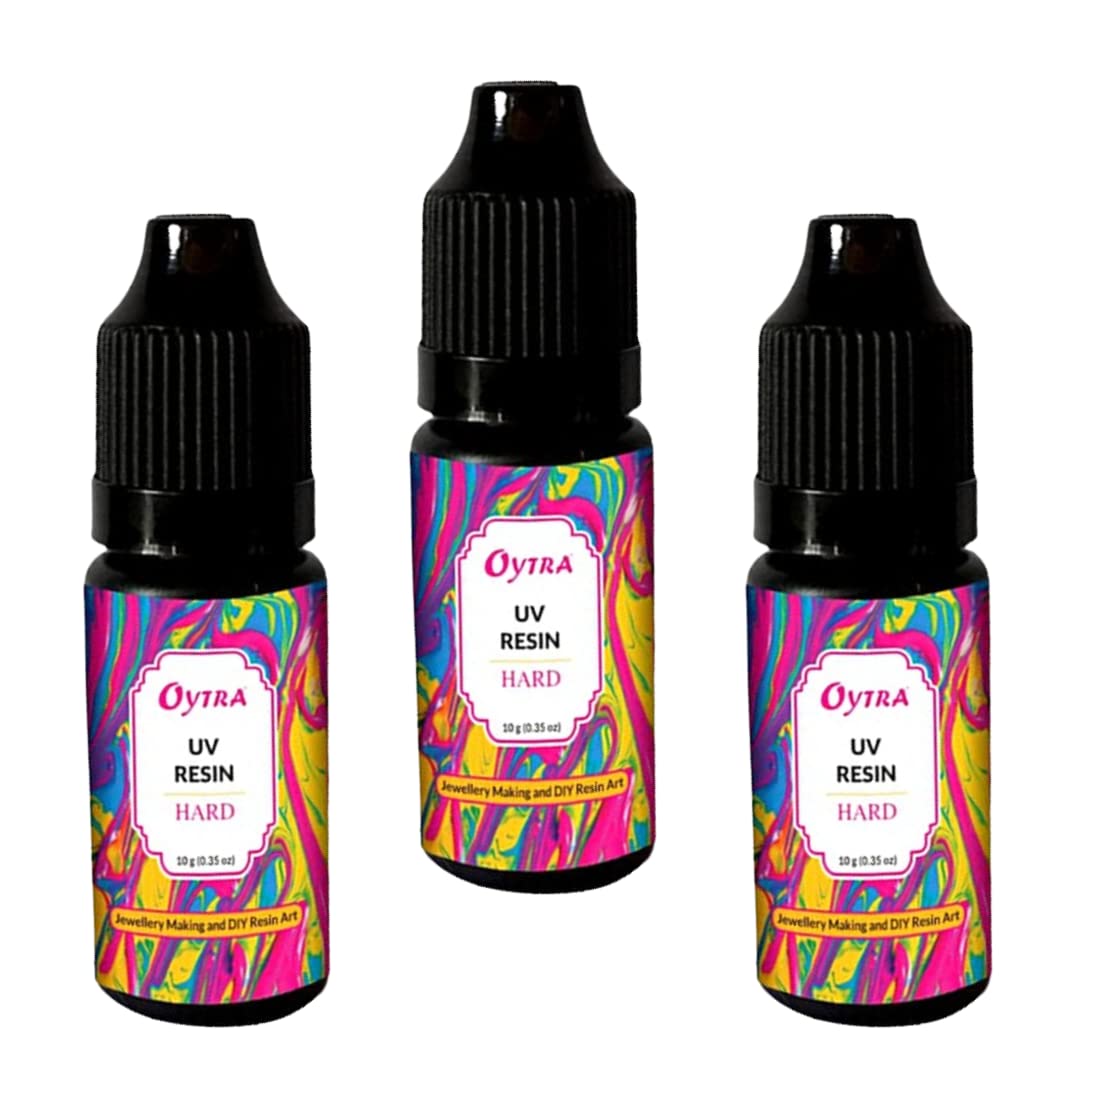 Oytra 10g UV 3 Bottles Resin Hard Clear Glossy Finish for Artists and Professionals Polymer Clay Gloss DIY Jewelry Craft Decoration Casting Coating